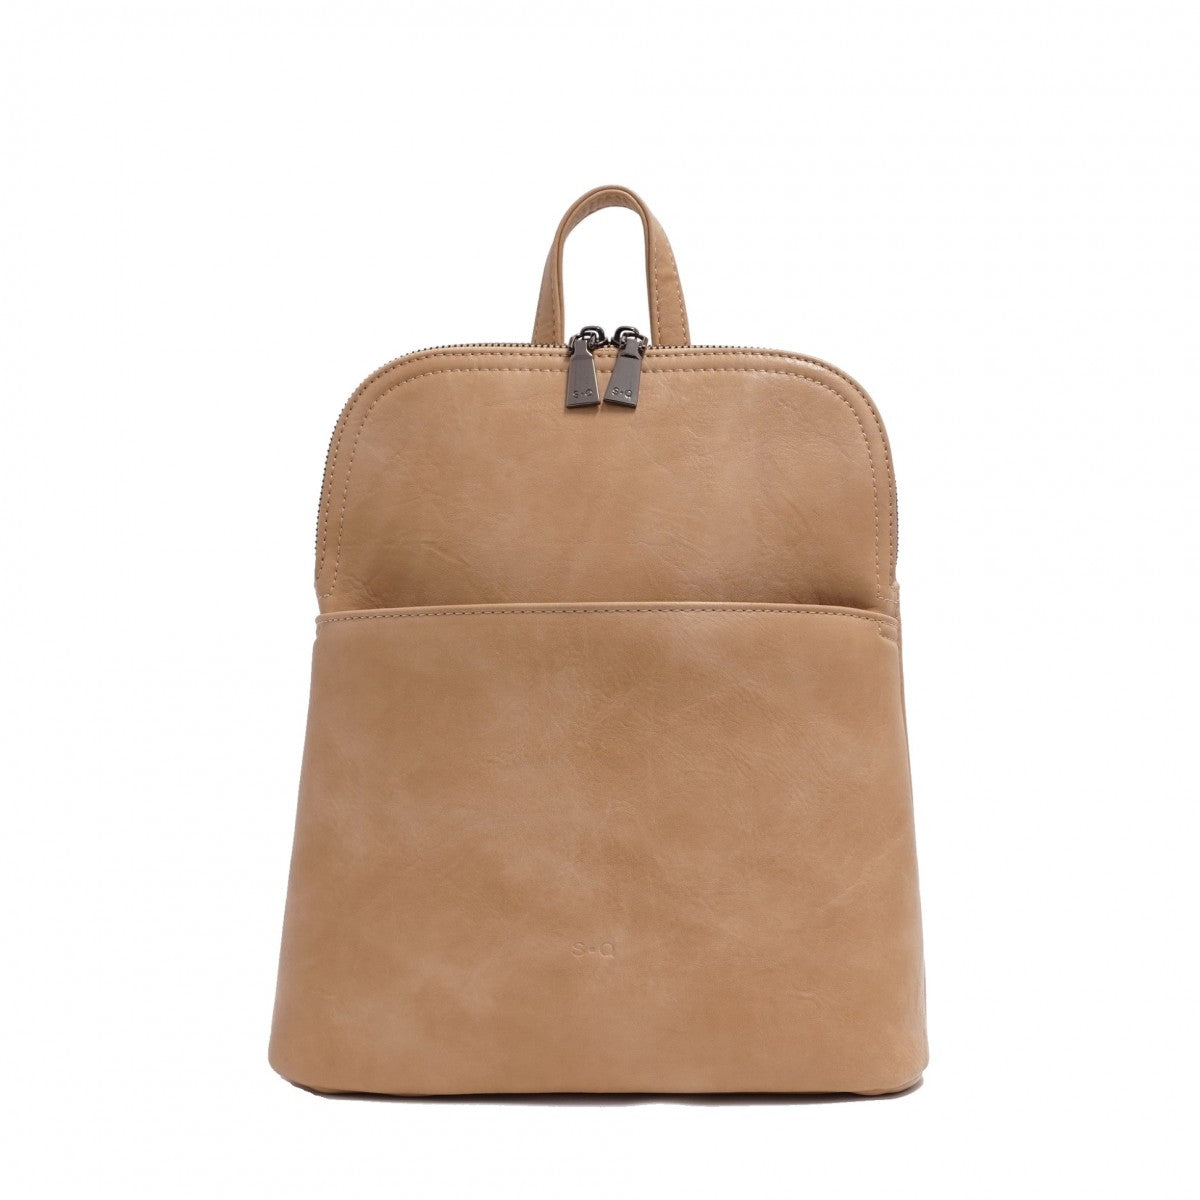 S-Q MAGGIE CONVERTIBLE BACKPACK IN LIGHT CAMEL